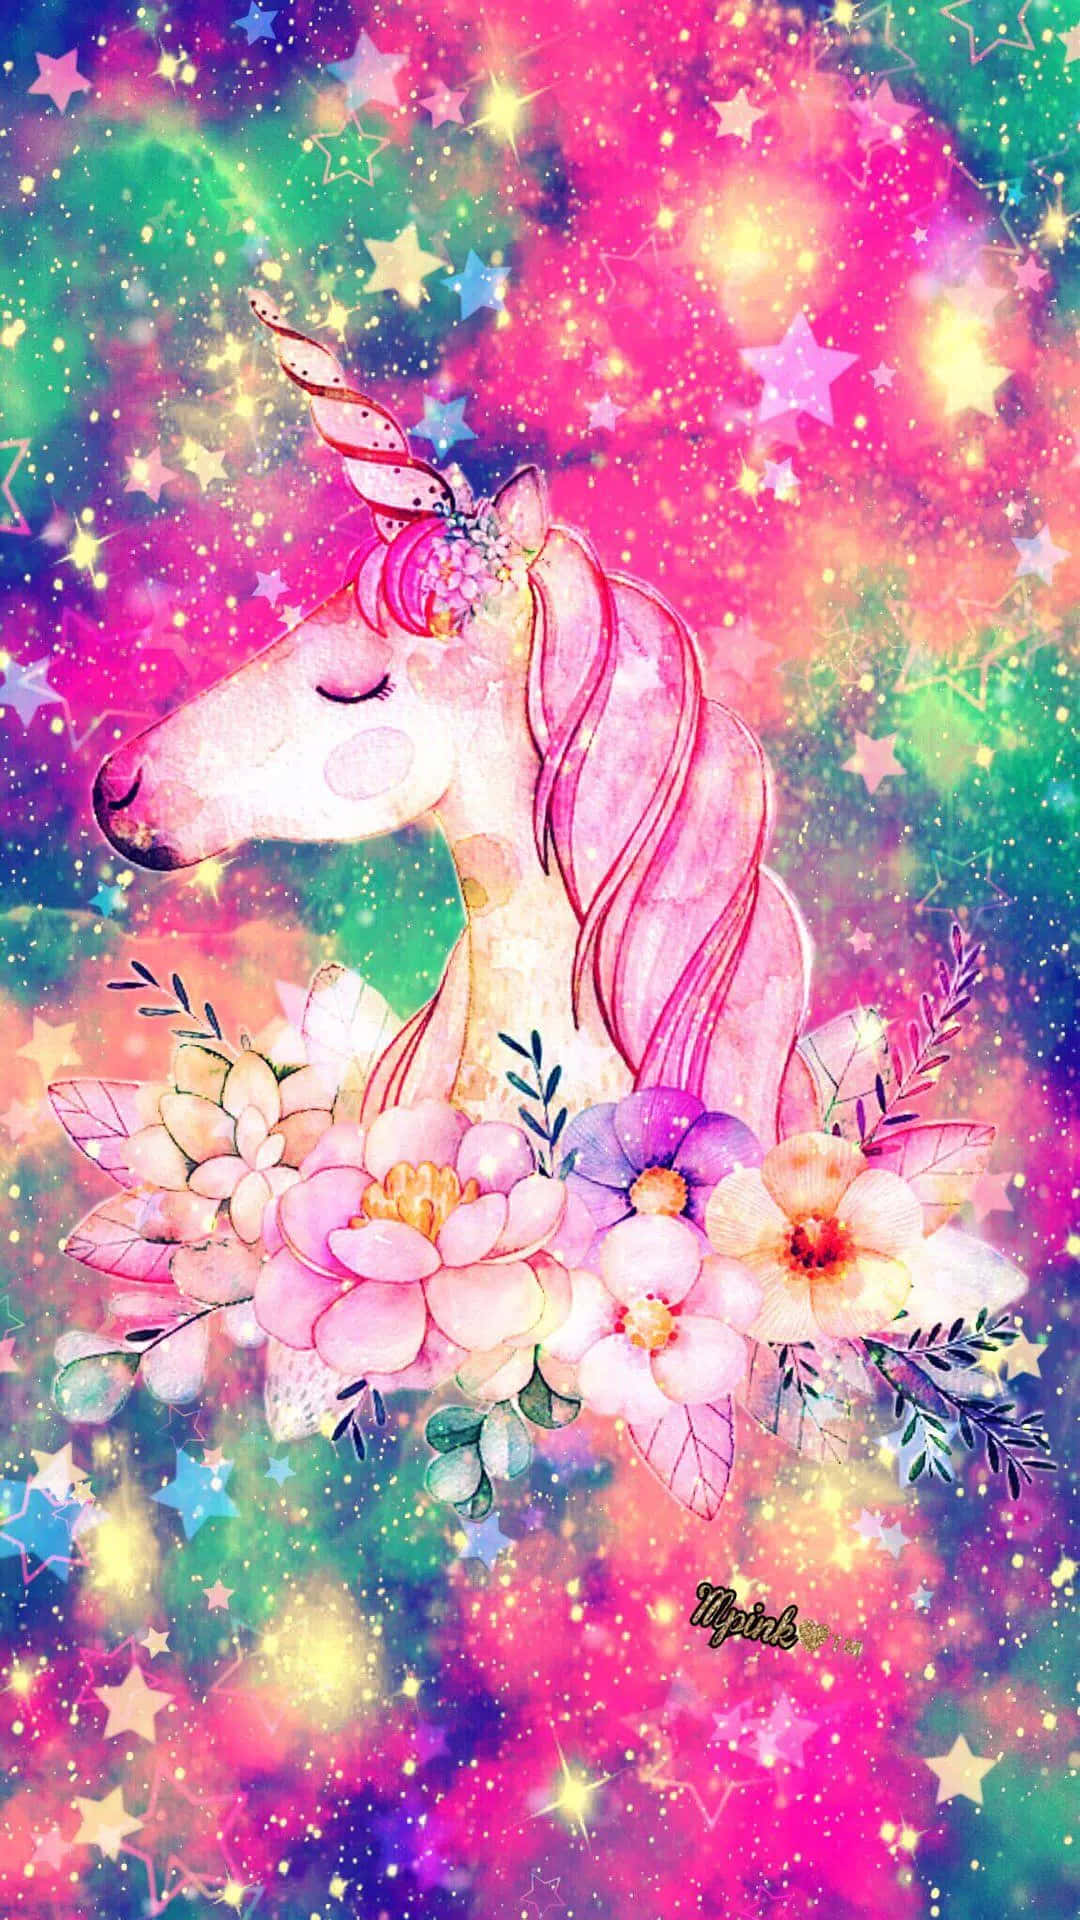 A Unicorn With Stars And Flowers In The Background Wallpaper